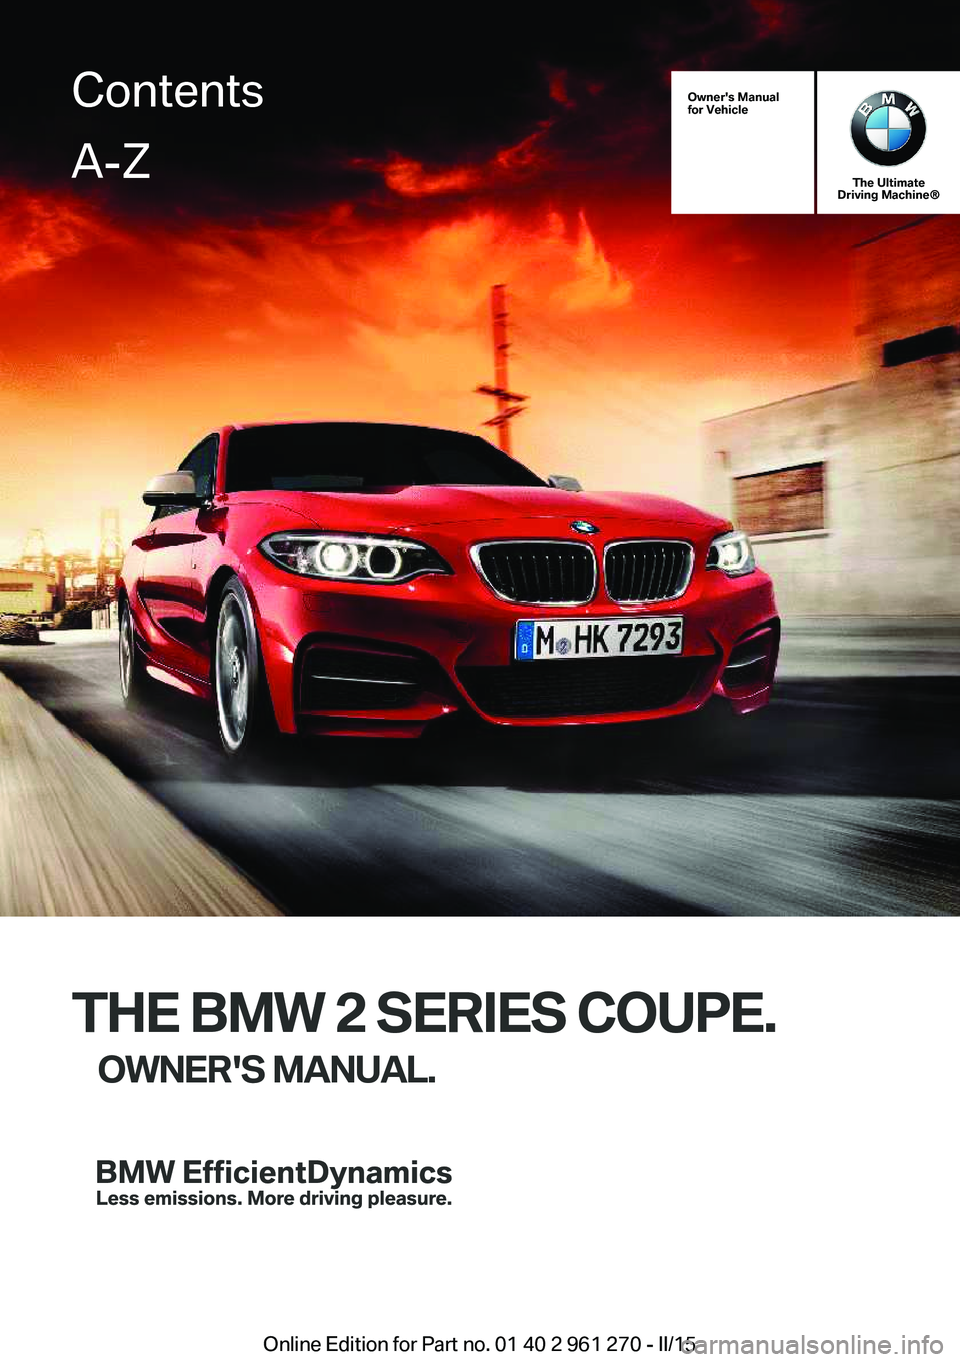 BMW 228I COUPE 2015  Owners Manual Owner's Manual
for Vehicle
The Ultimate
Driving Machine®
THE BMW 2 SERIES COUPE.
OWNER'S MANUAL.
ContentsA-Z
Online Edition for Part no. 01 40 2 961 270 - II/15   